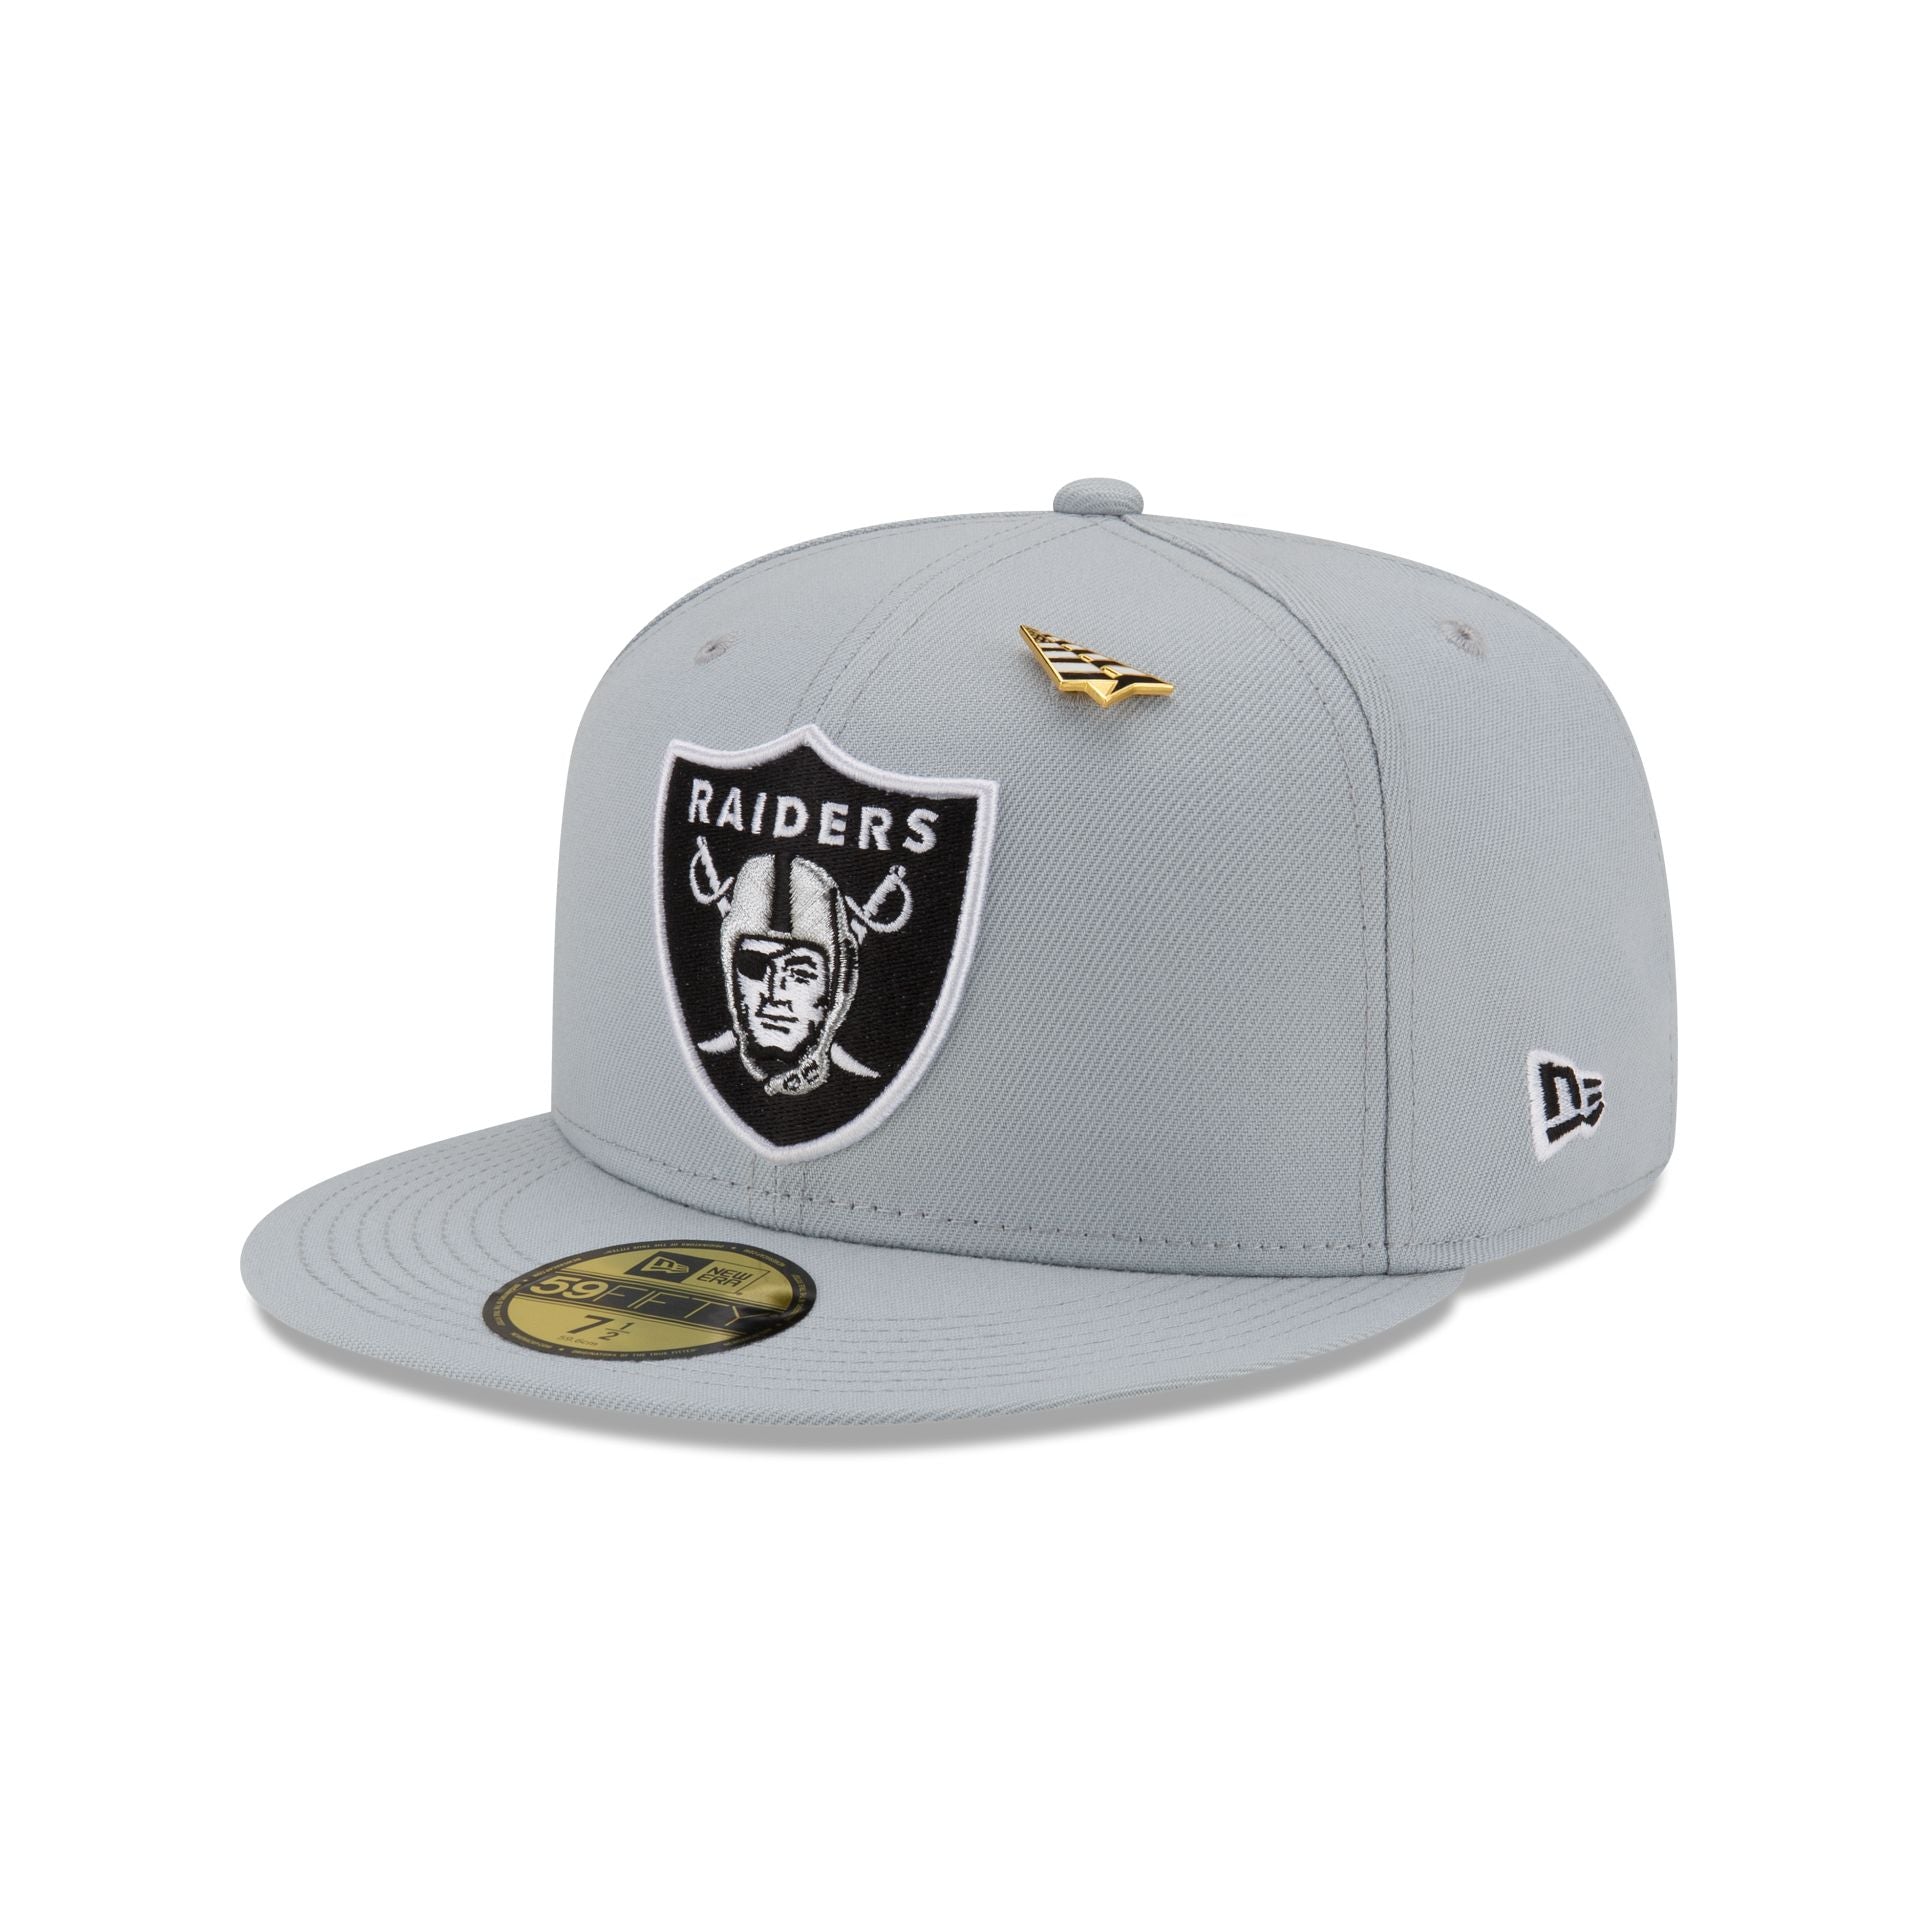 Paper Planes x Jacksonville Jaguars 59Fifty Fitted Hat